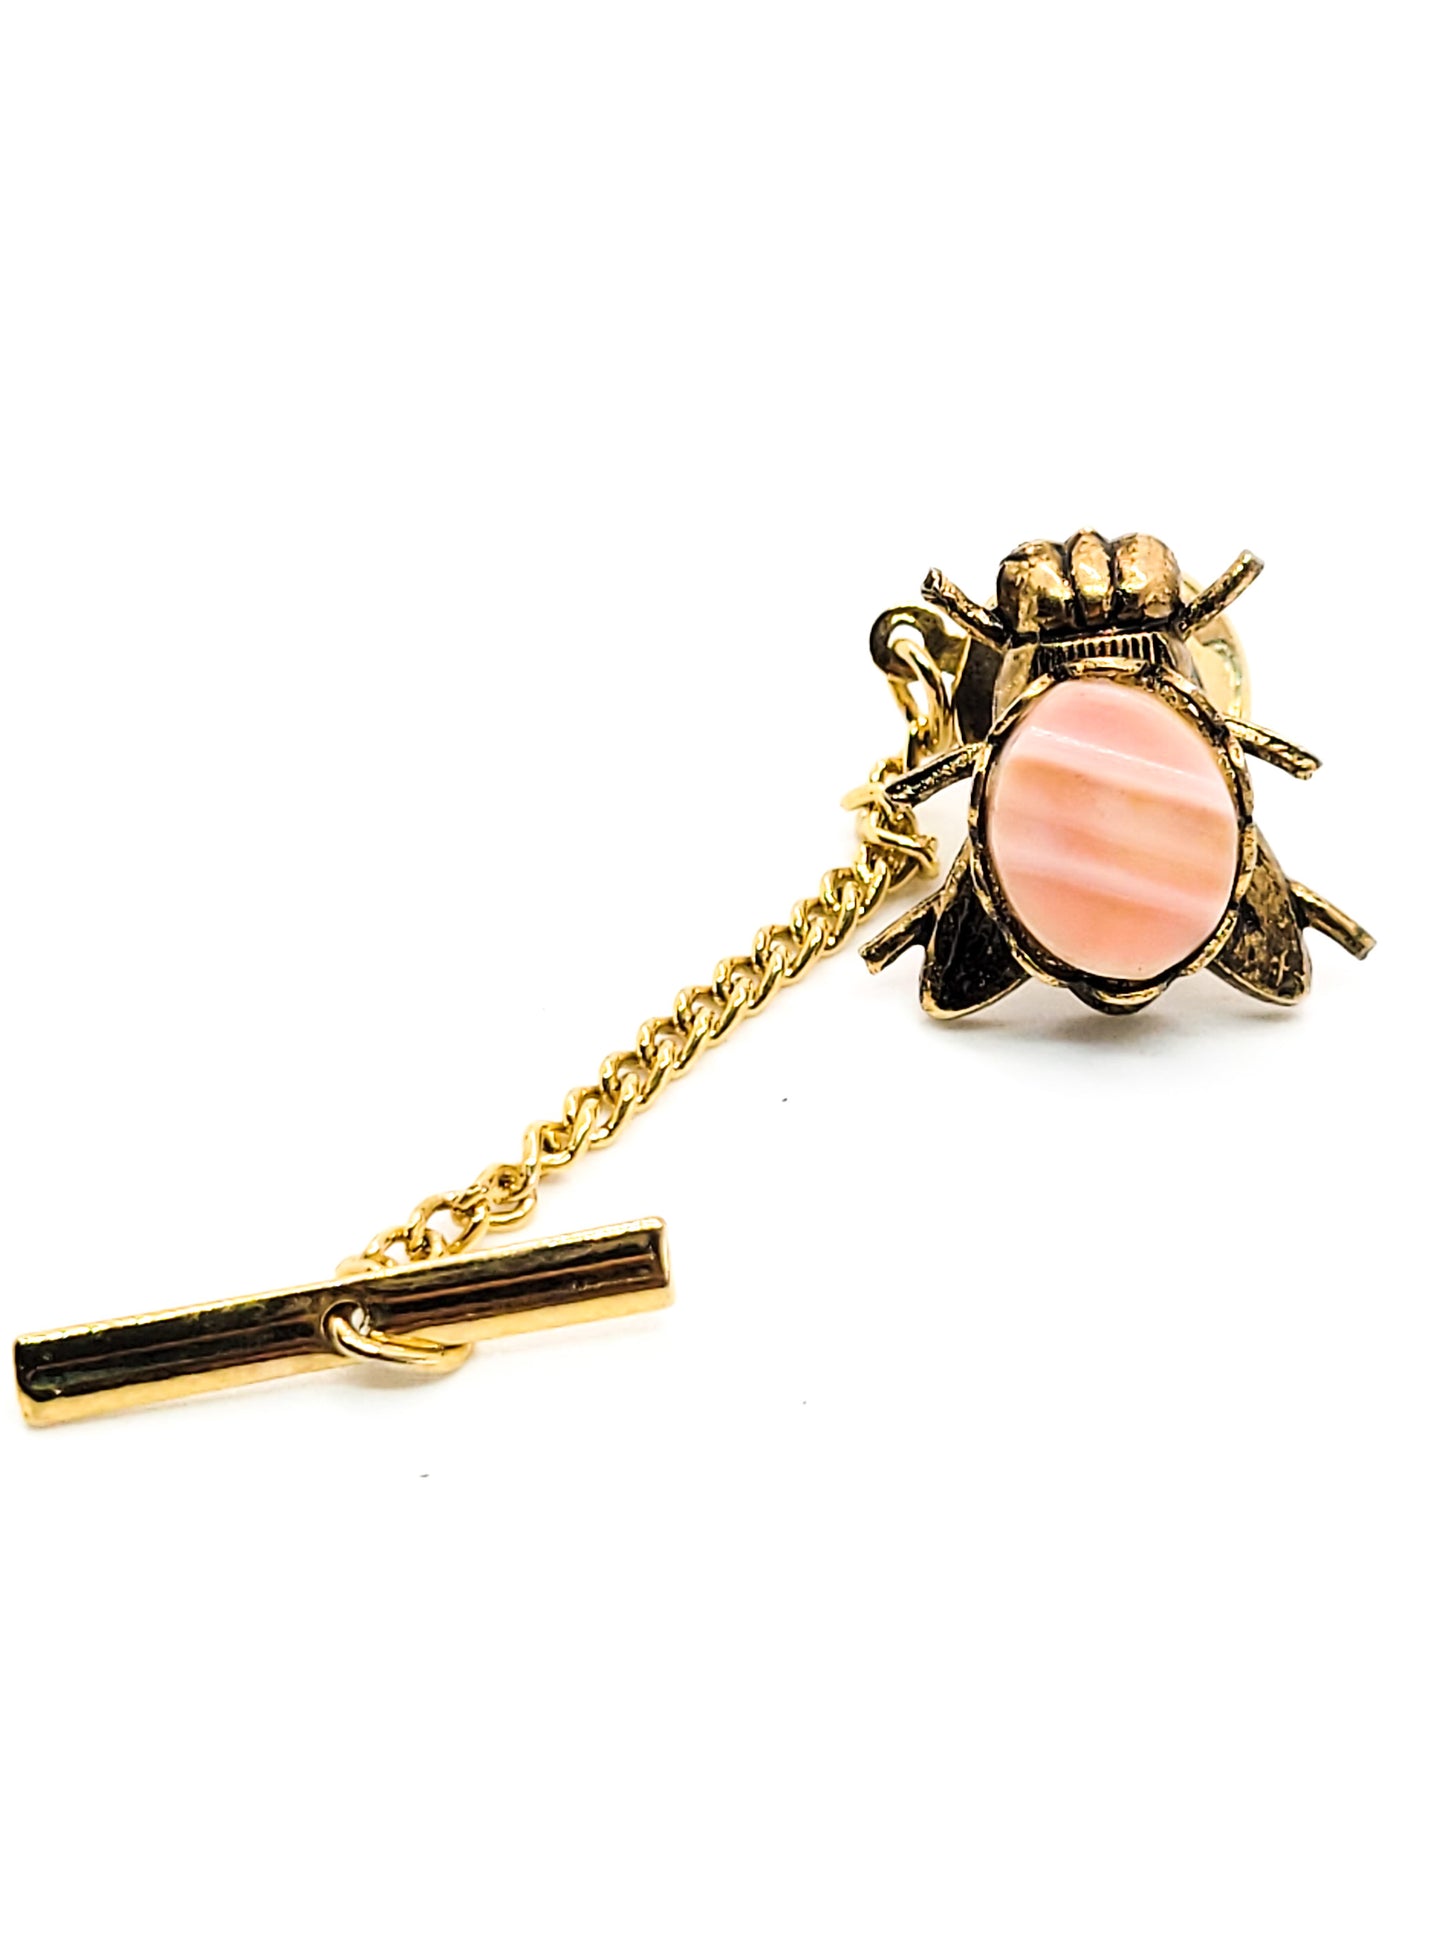 Fly golden insect molded pink wave glass vintage tie tack pin figural brooch